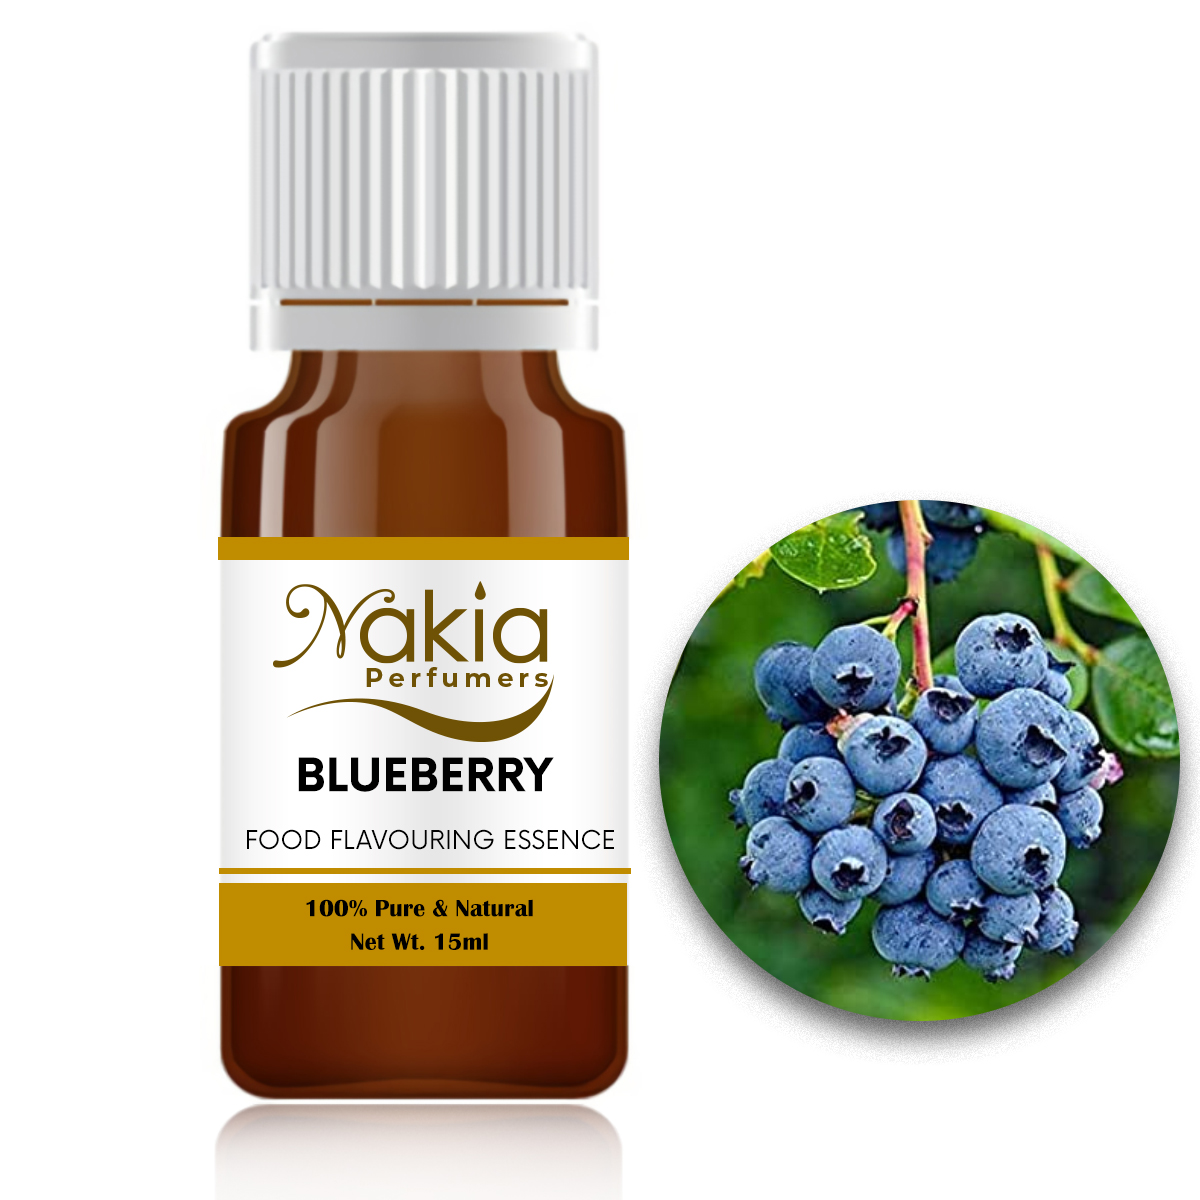 BLUEBERRY FLAVOURING ESSENCE